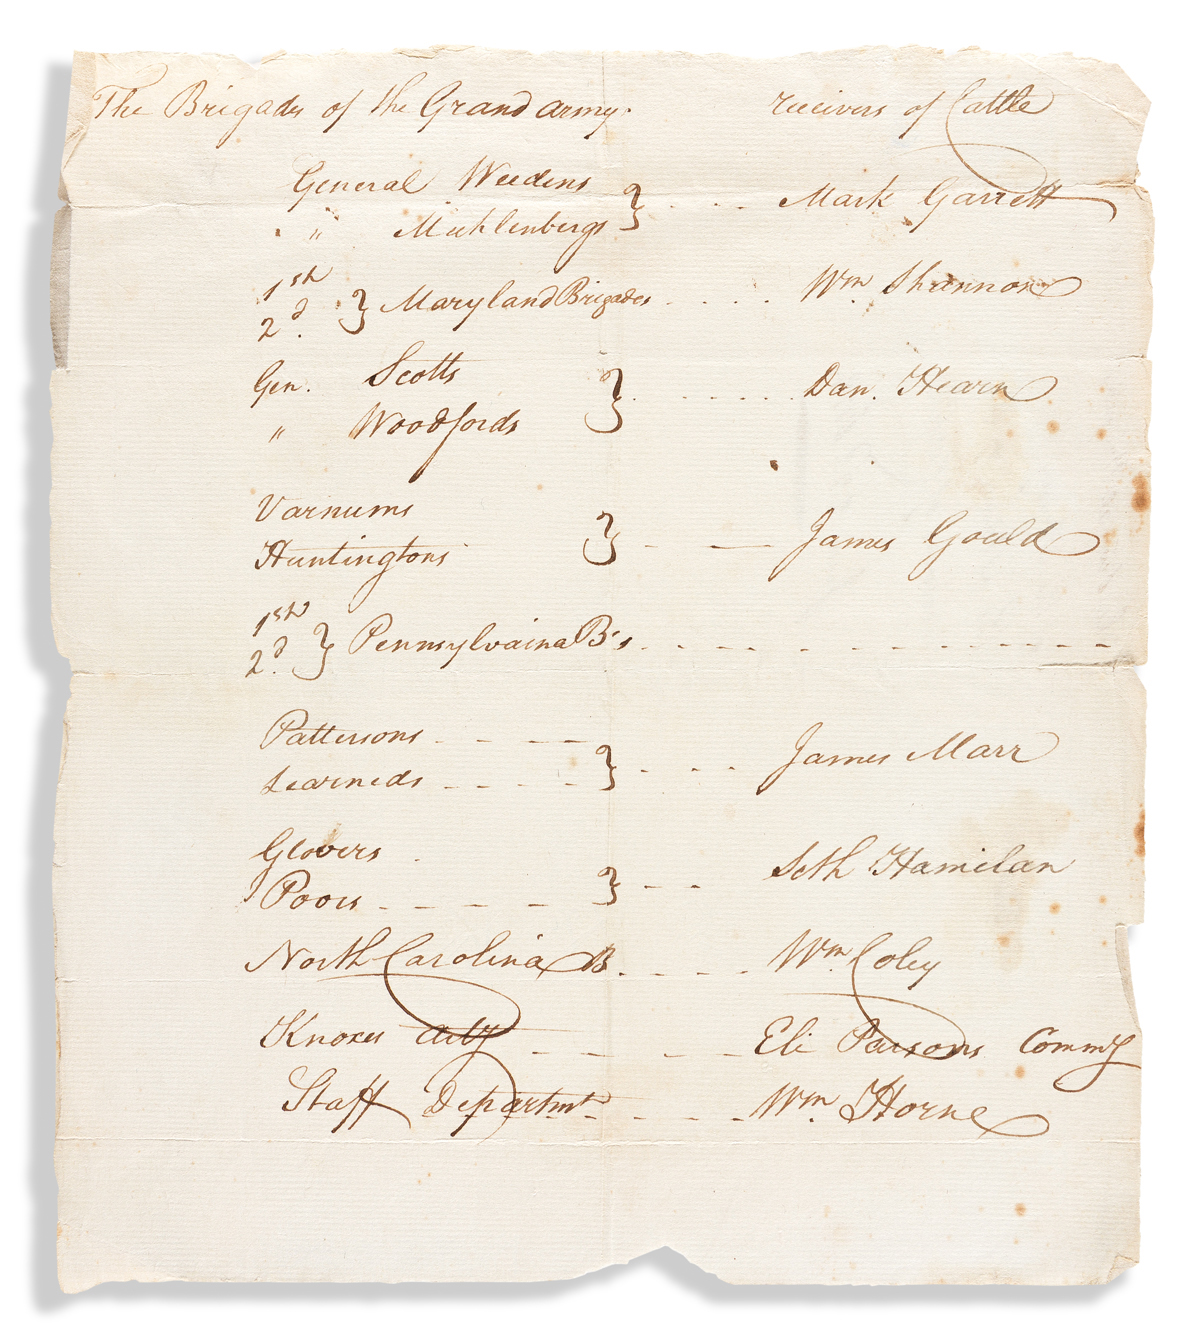 (AMERICAN REVOLUTION--1778.) List of Continental Army brigades 4 days after leaving Valley Forge, with Receivers of Cattle for each.